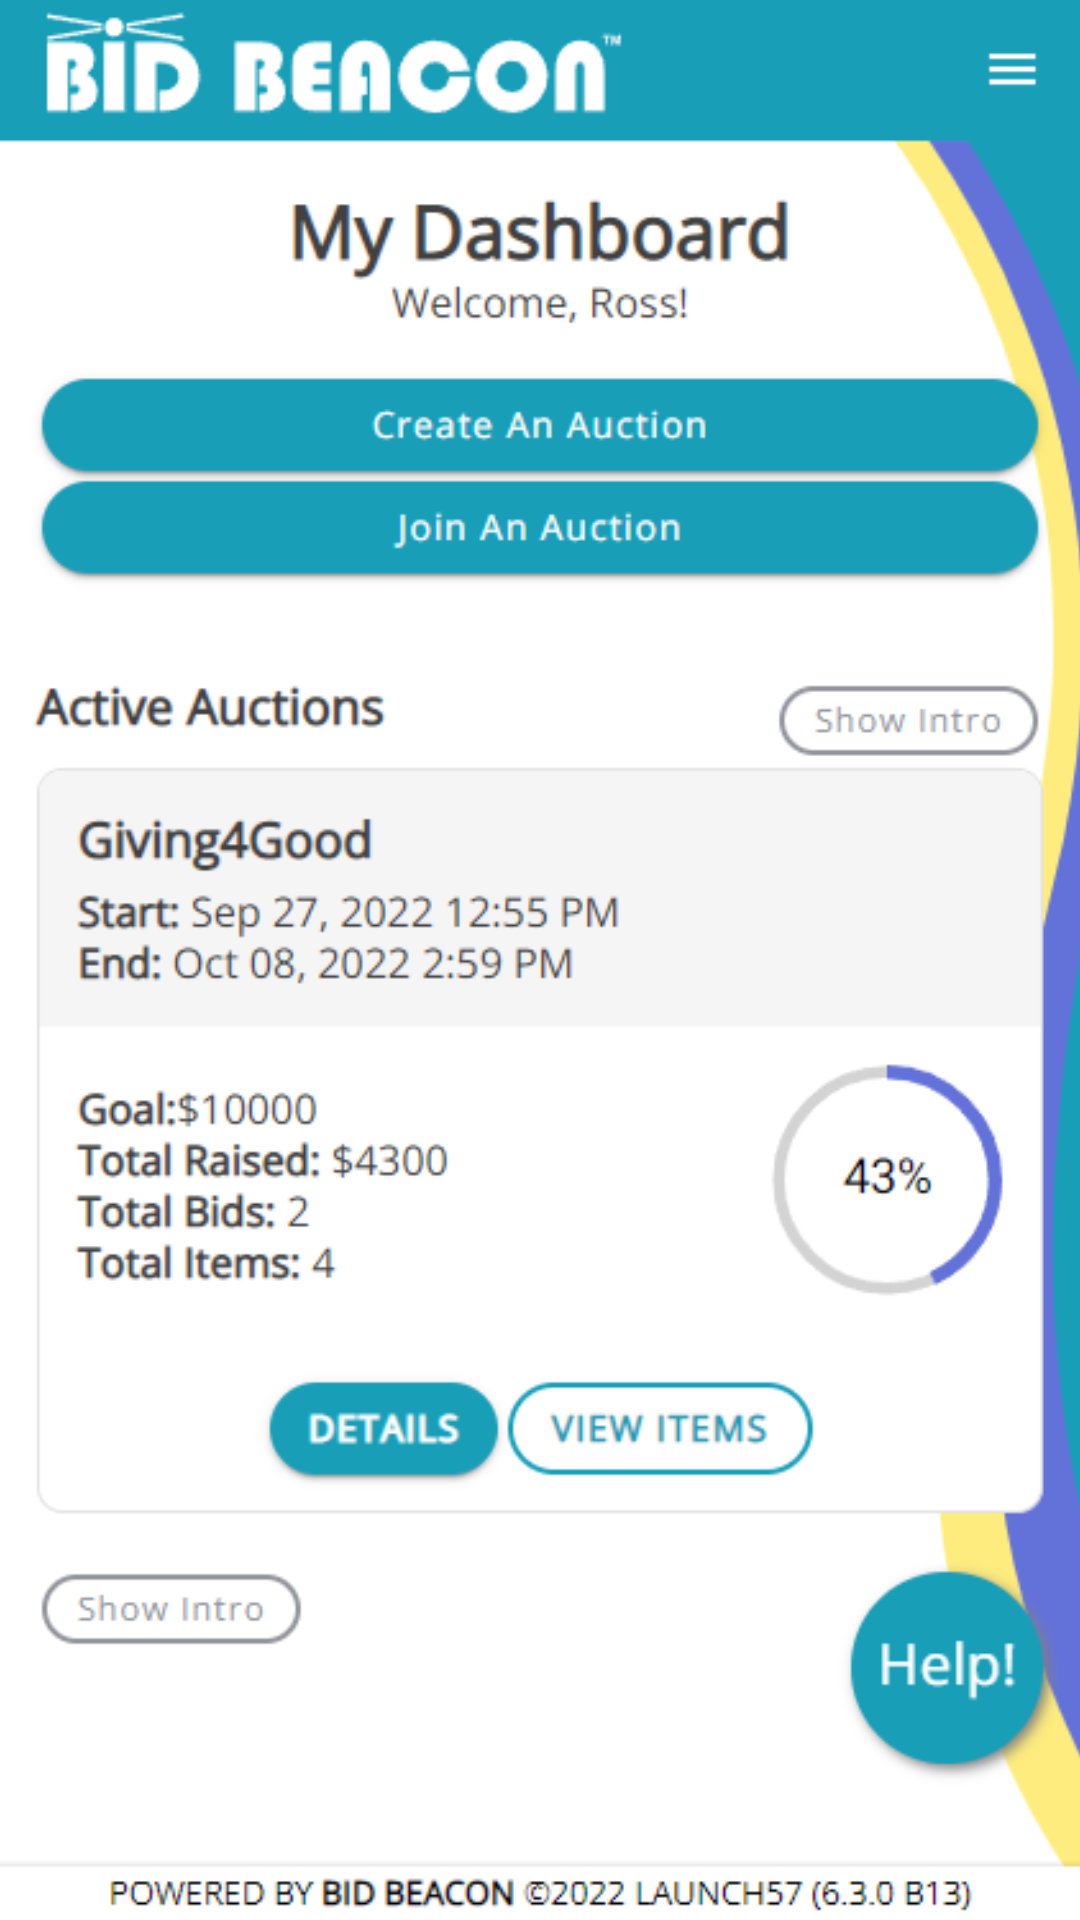 Admin and Guest shared dashboard, view current or past auctions or create your own auction!